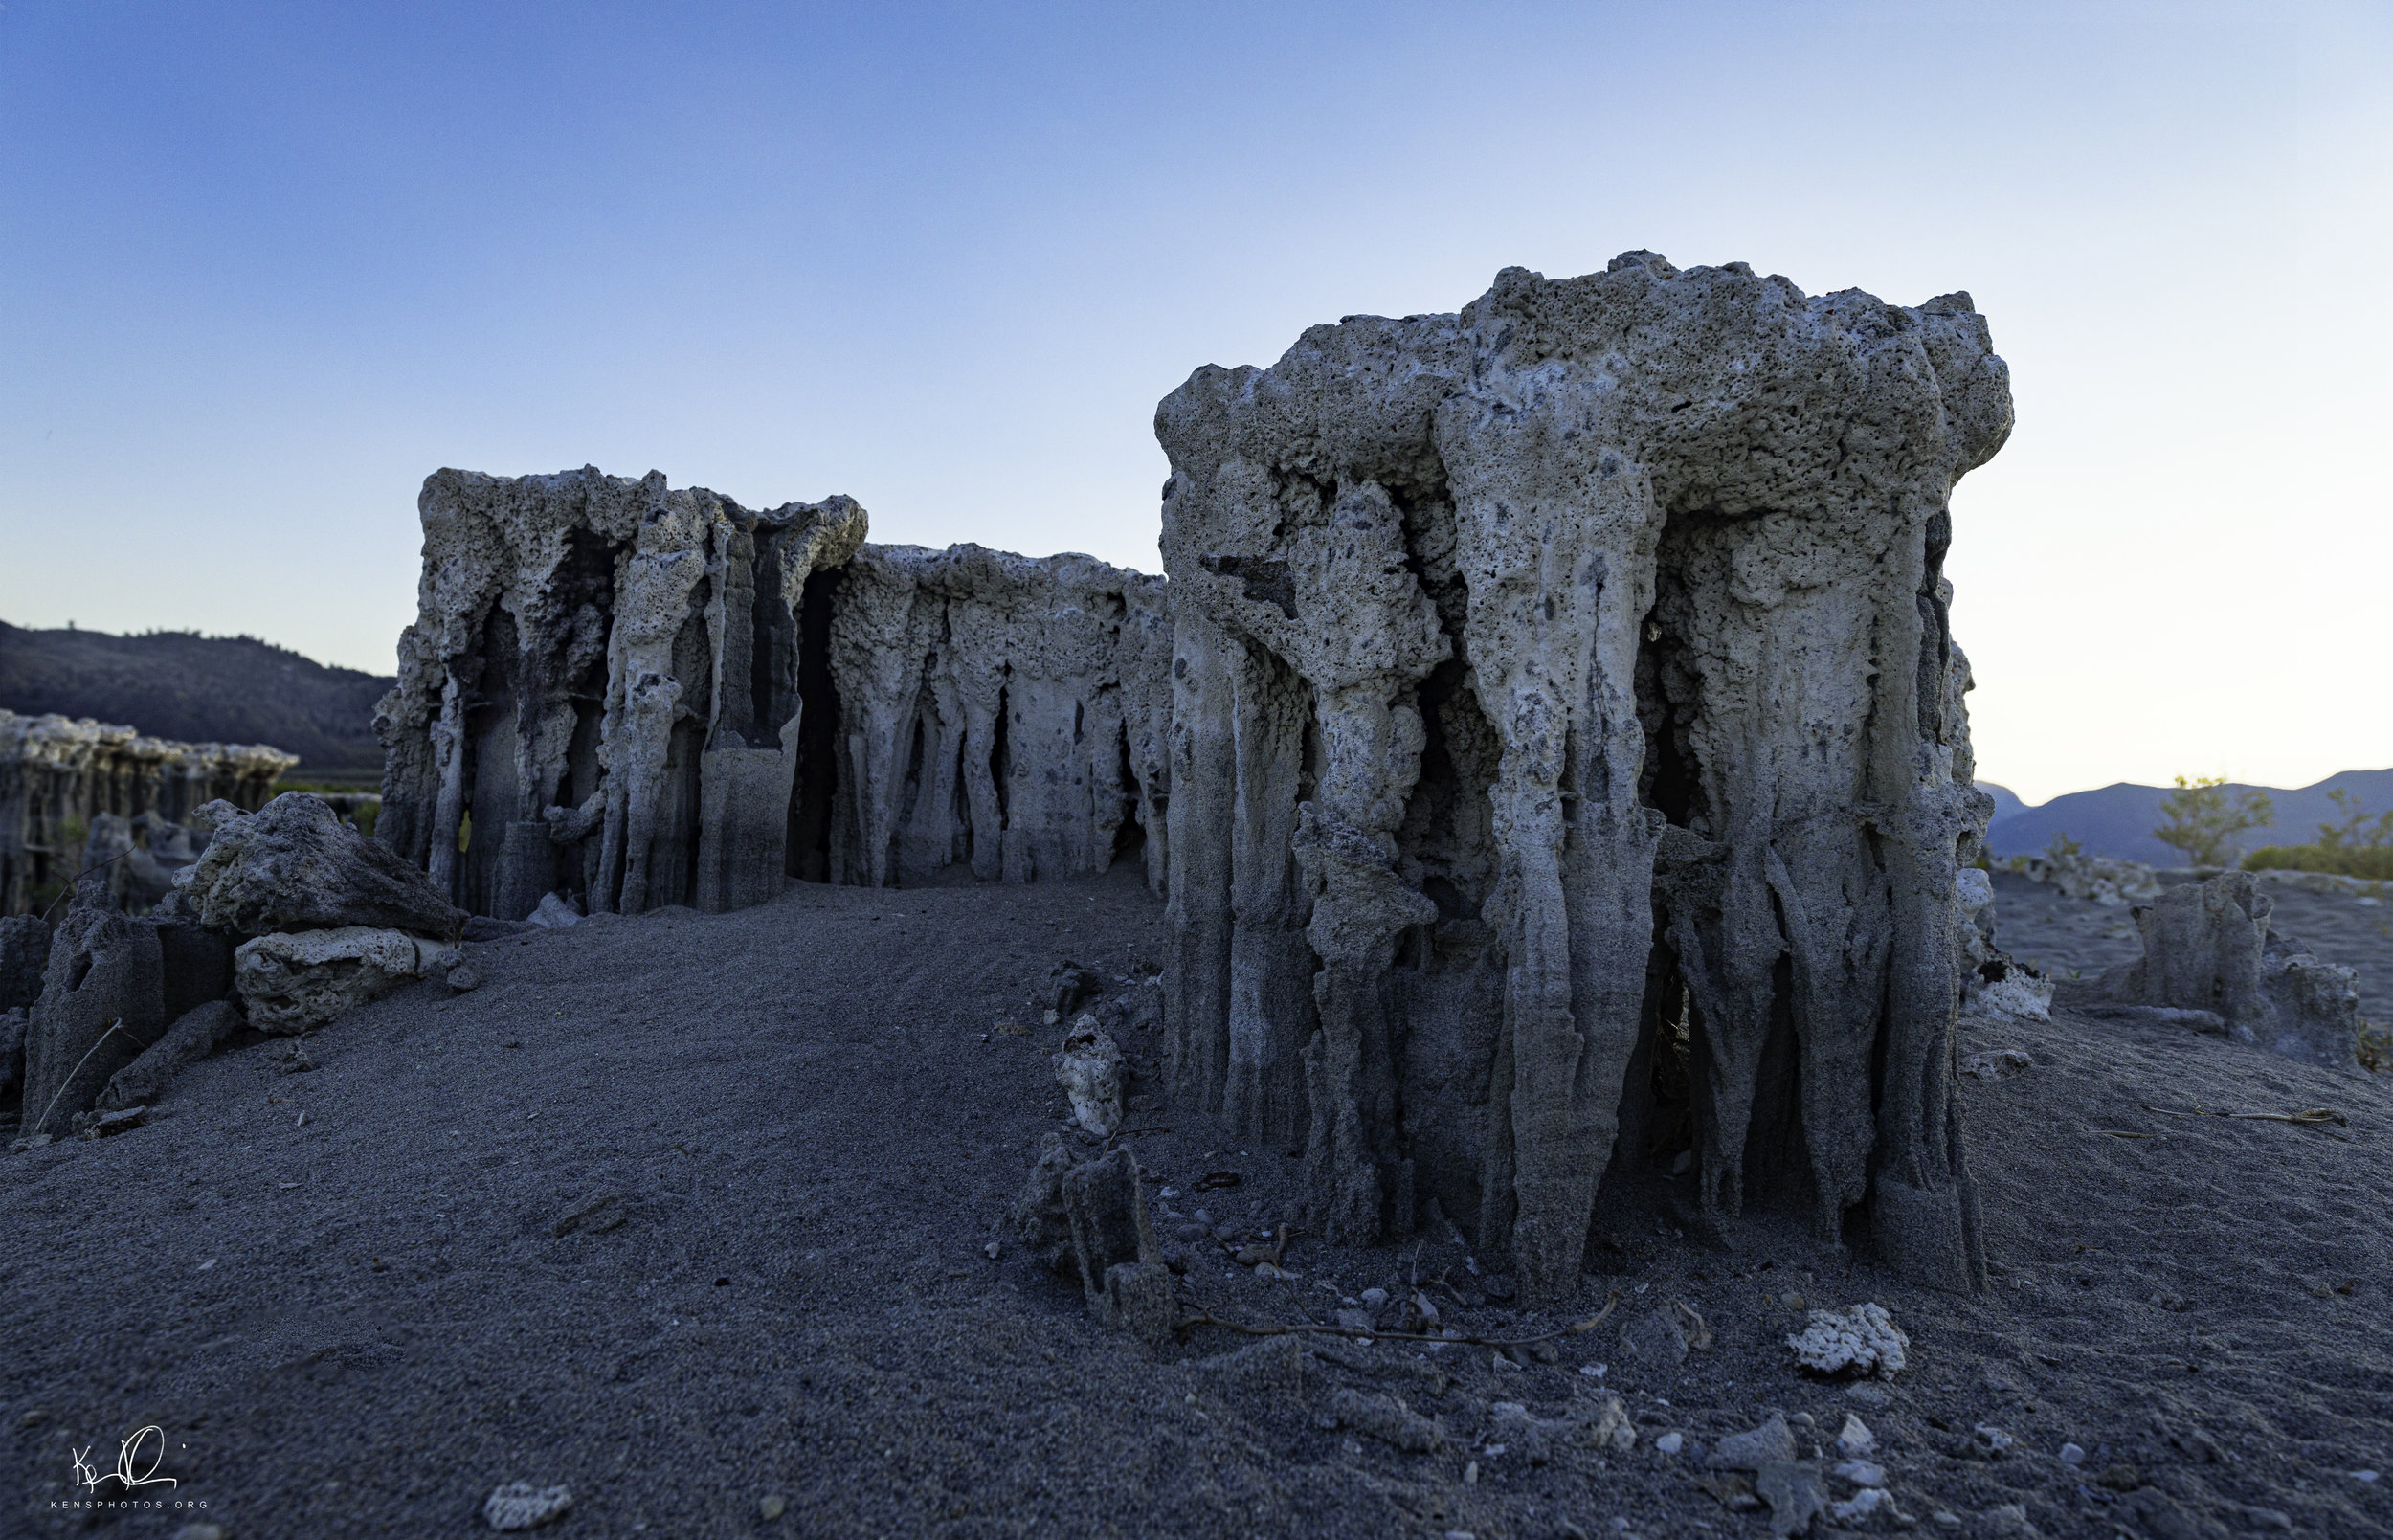   EASTERN SIERRAS, CA.  WHAT CIVILIZATION BUILT THESE STRUCTURES.  ER…NO CIVILIZATION.  THEY ARE ONLY ABOUT 8 INCHES HIGH.    